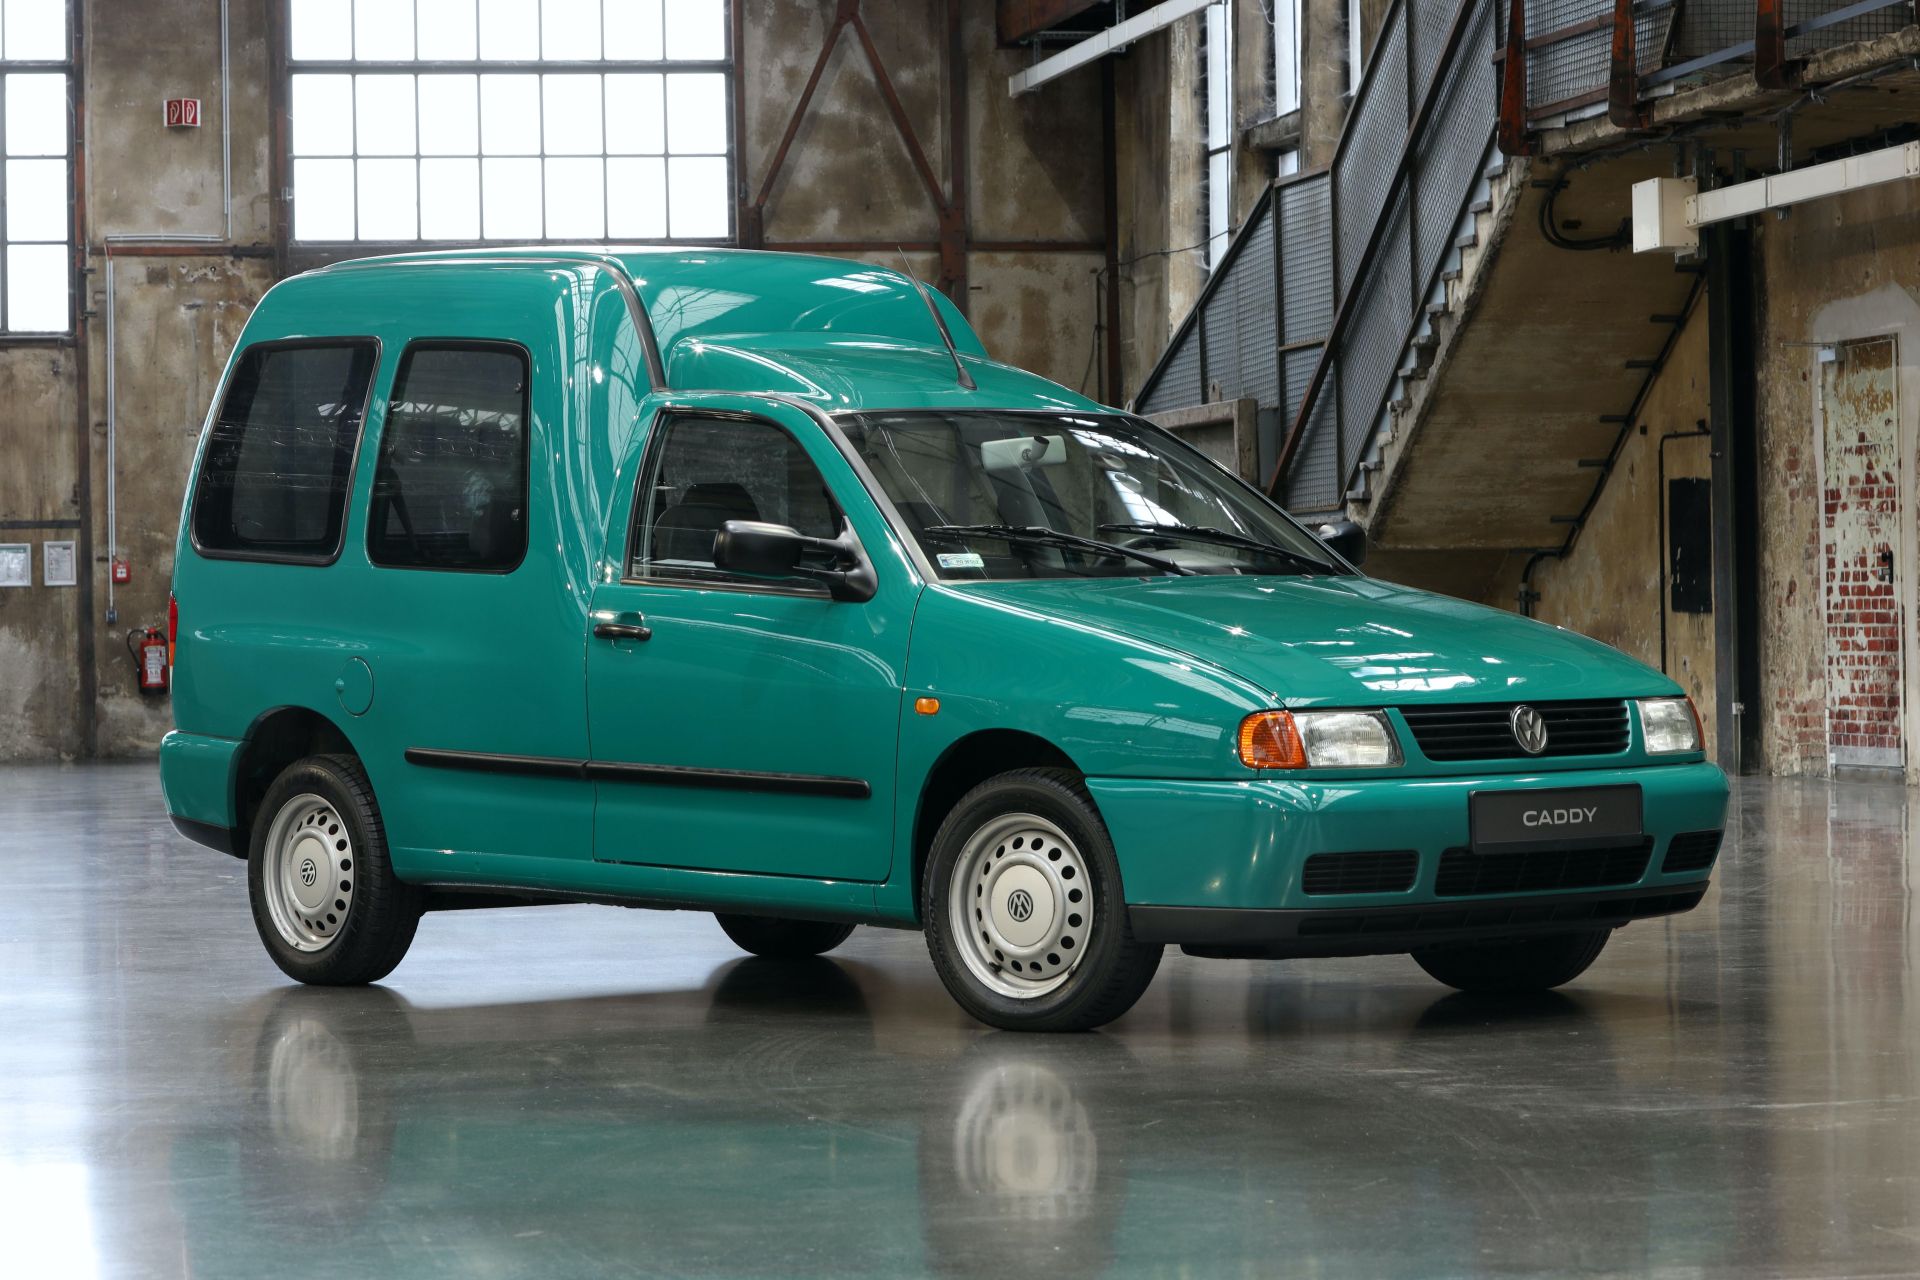 Throwback Saturday: The Evolution Of The VW Caddy Over Four